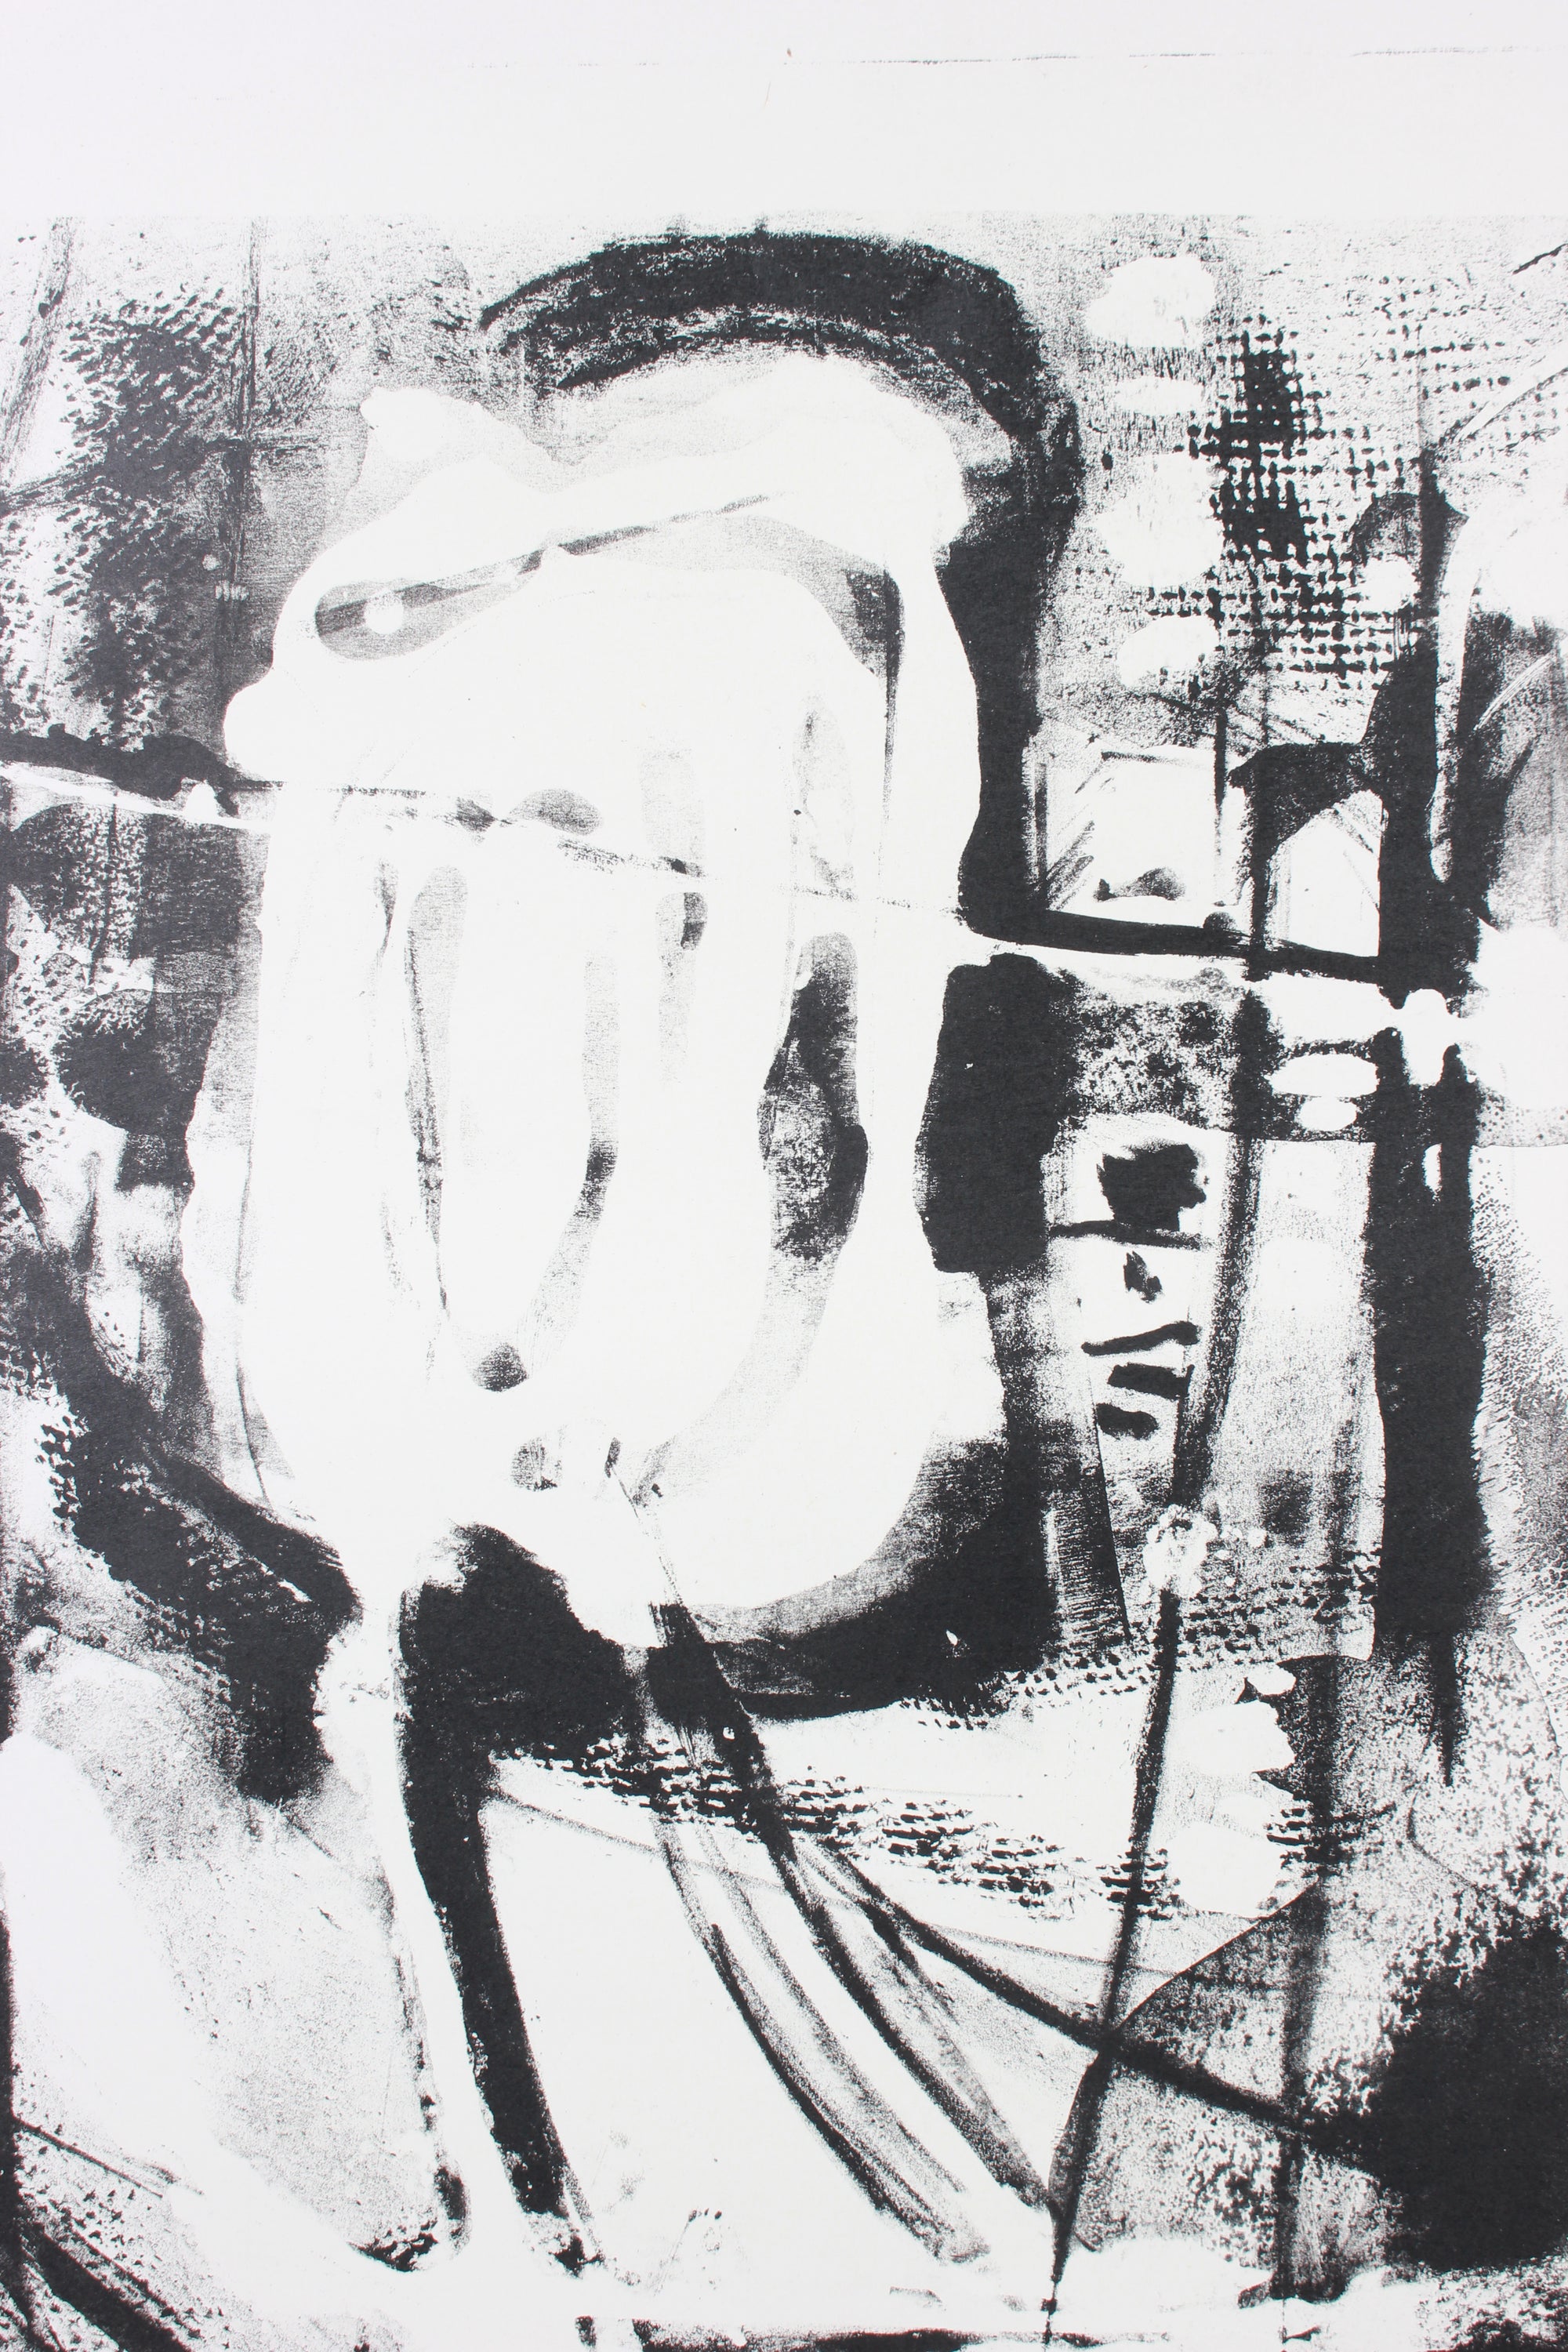 Monochrome Splatter & Gesture Abstract <br>1950s Stone Lithograph <br><br>#A7377